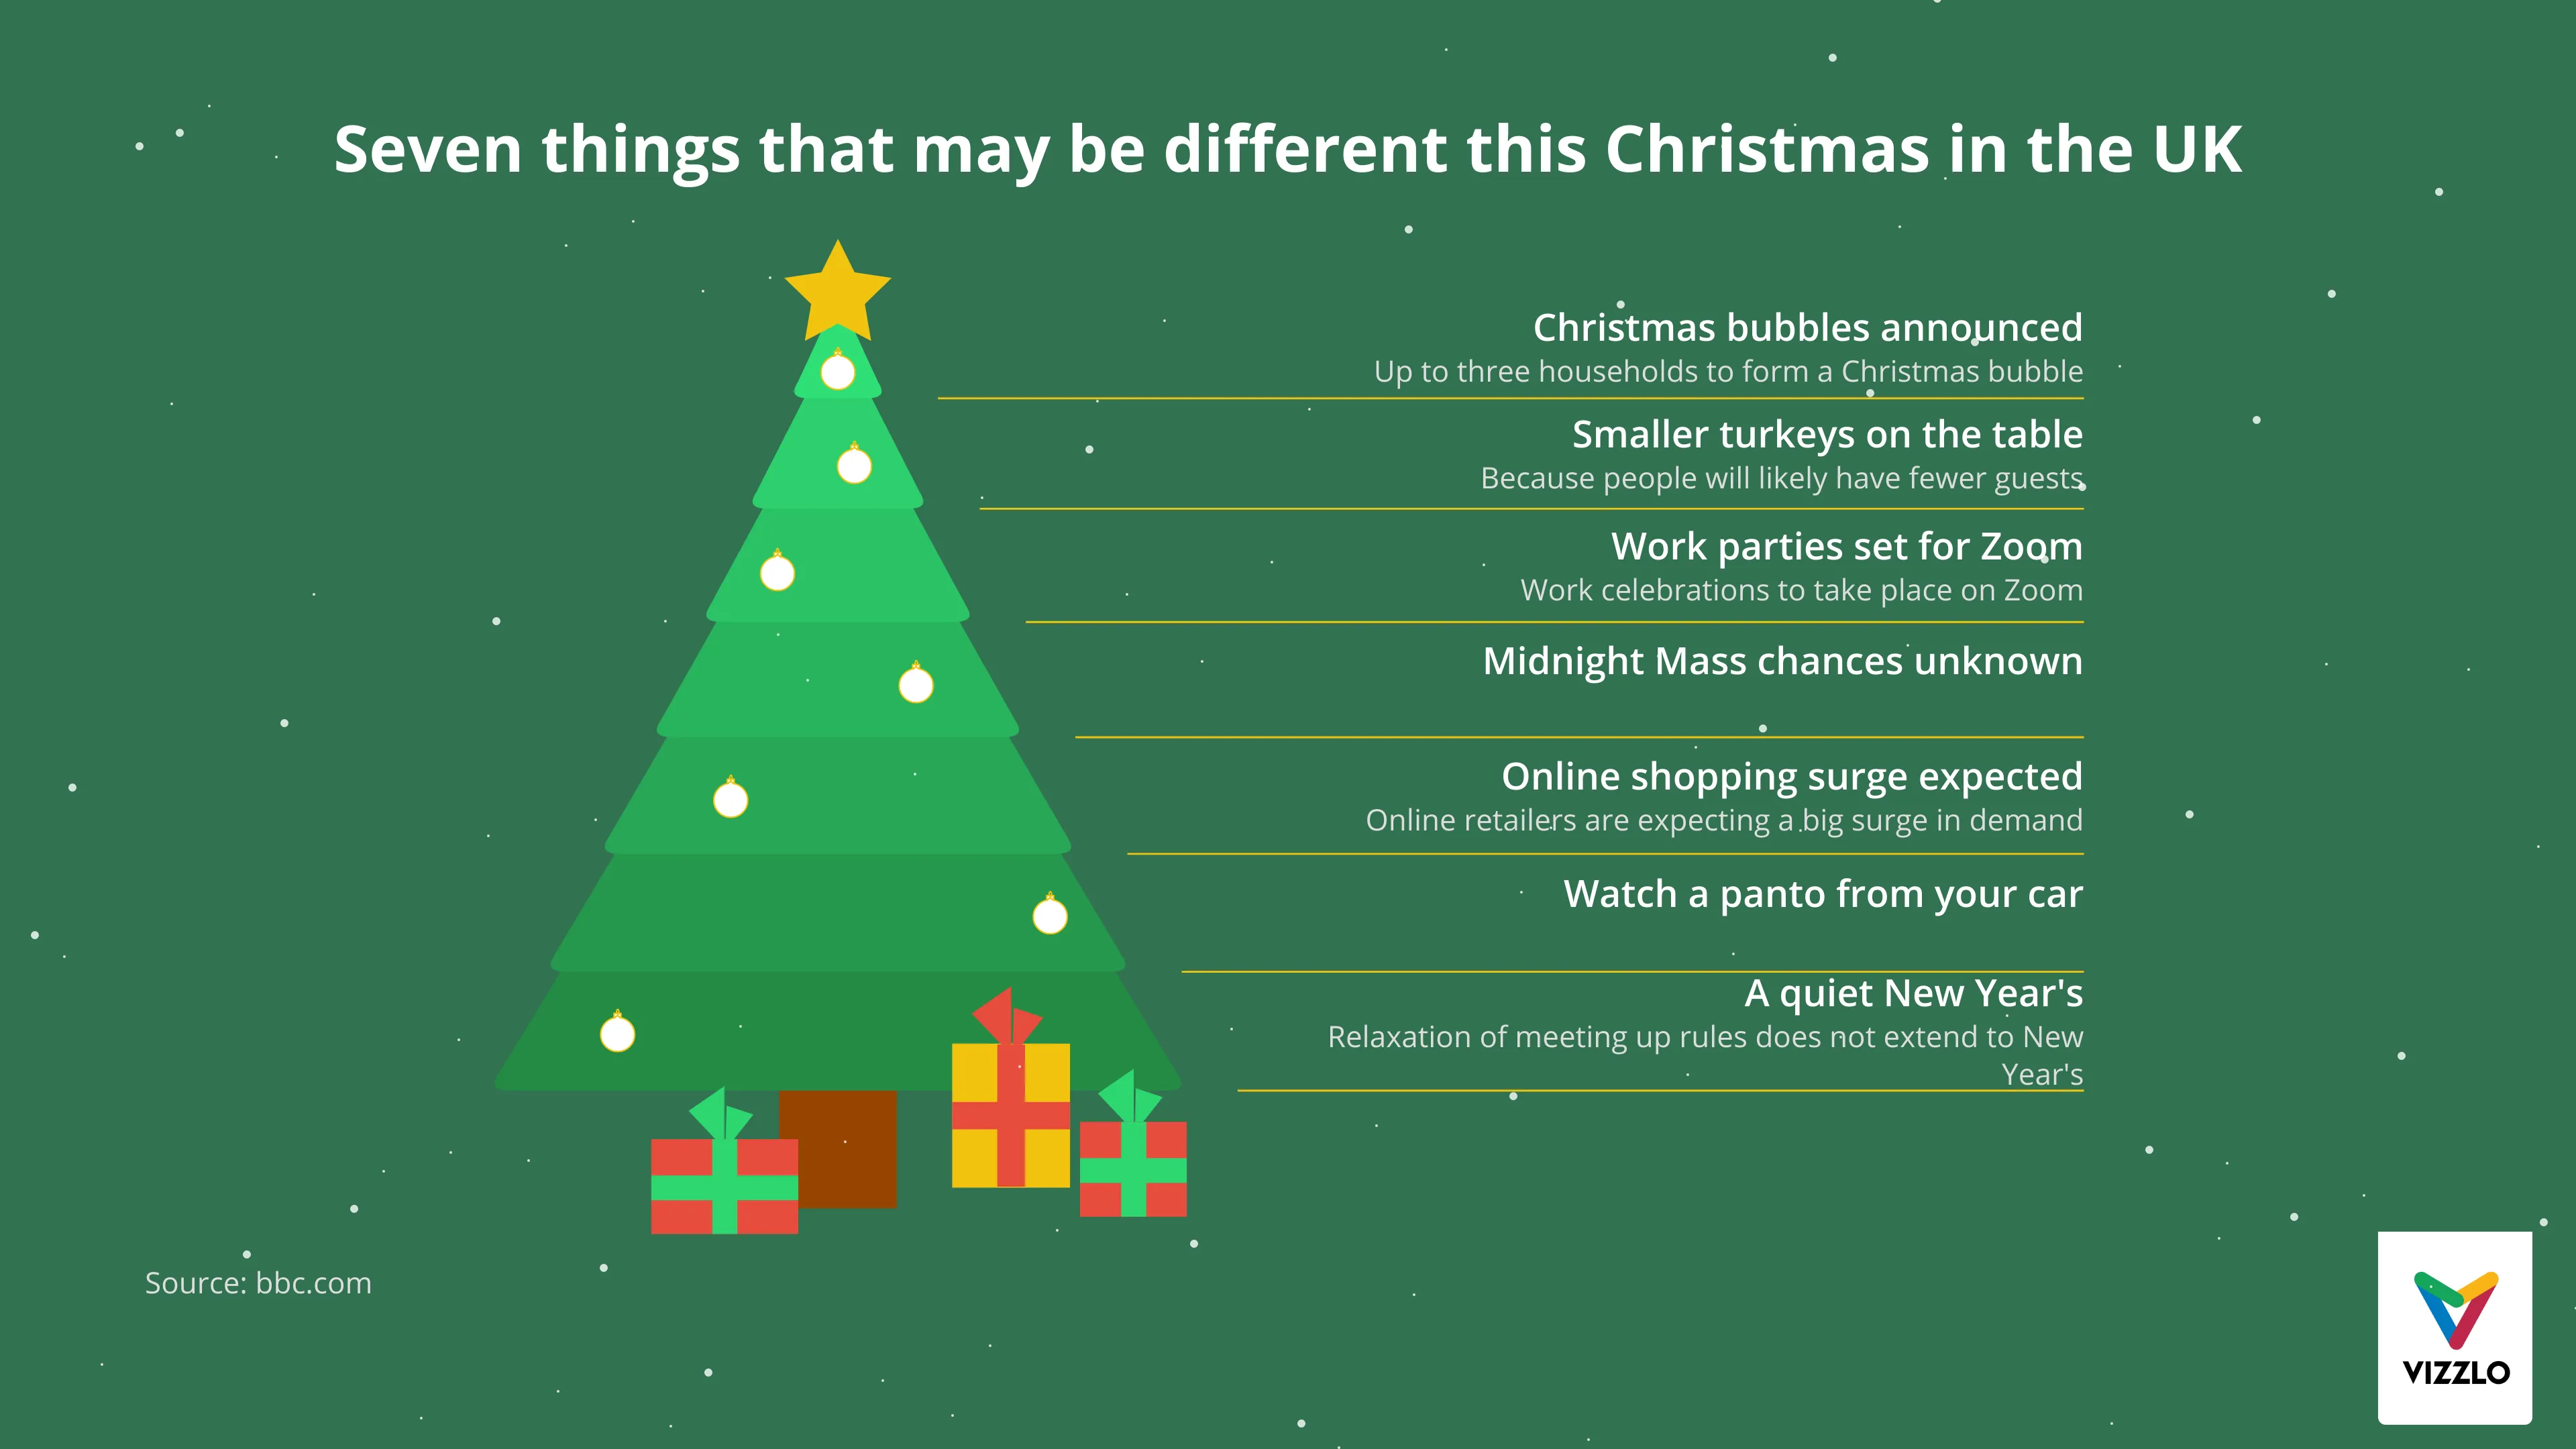 Seven things that may be different this Christmas in the UK